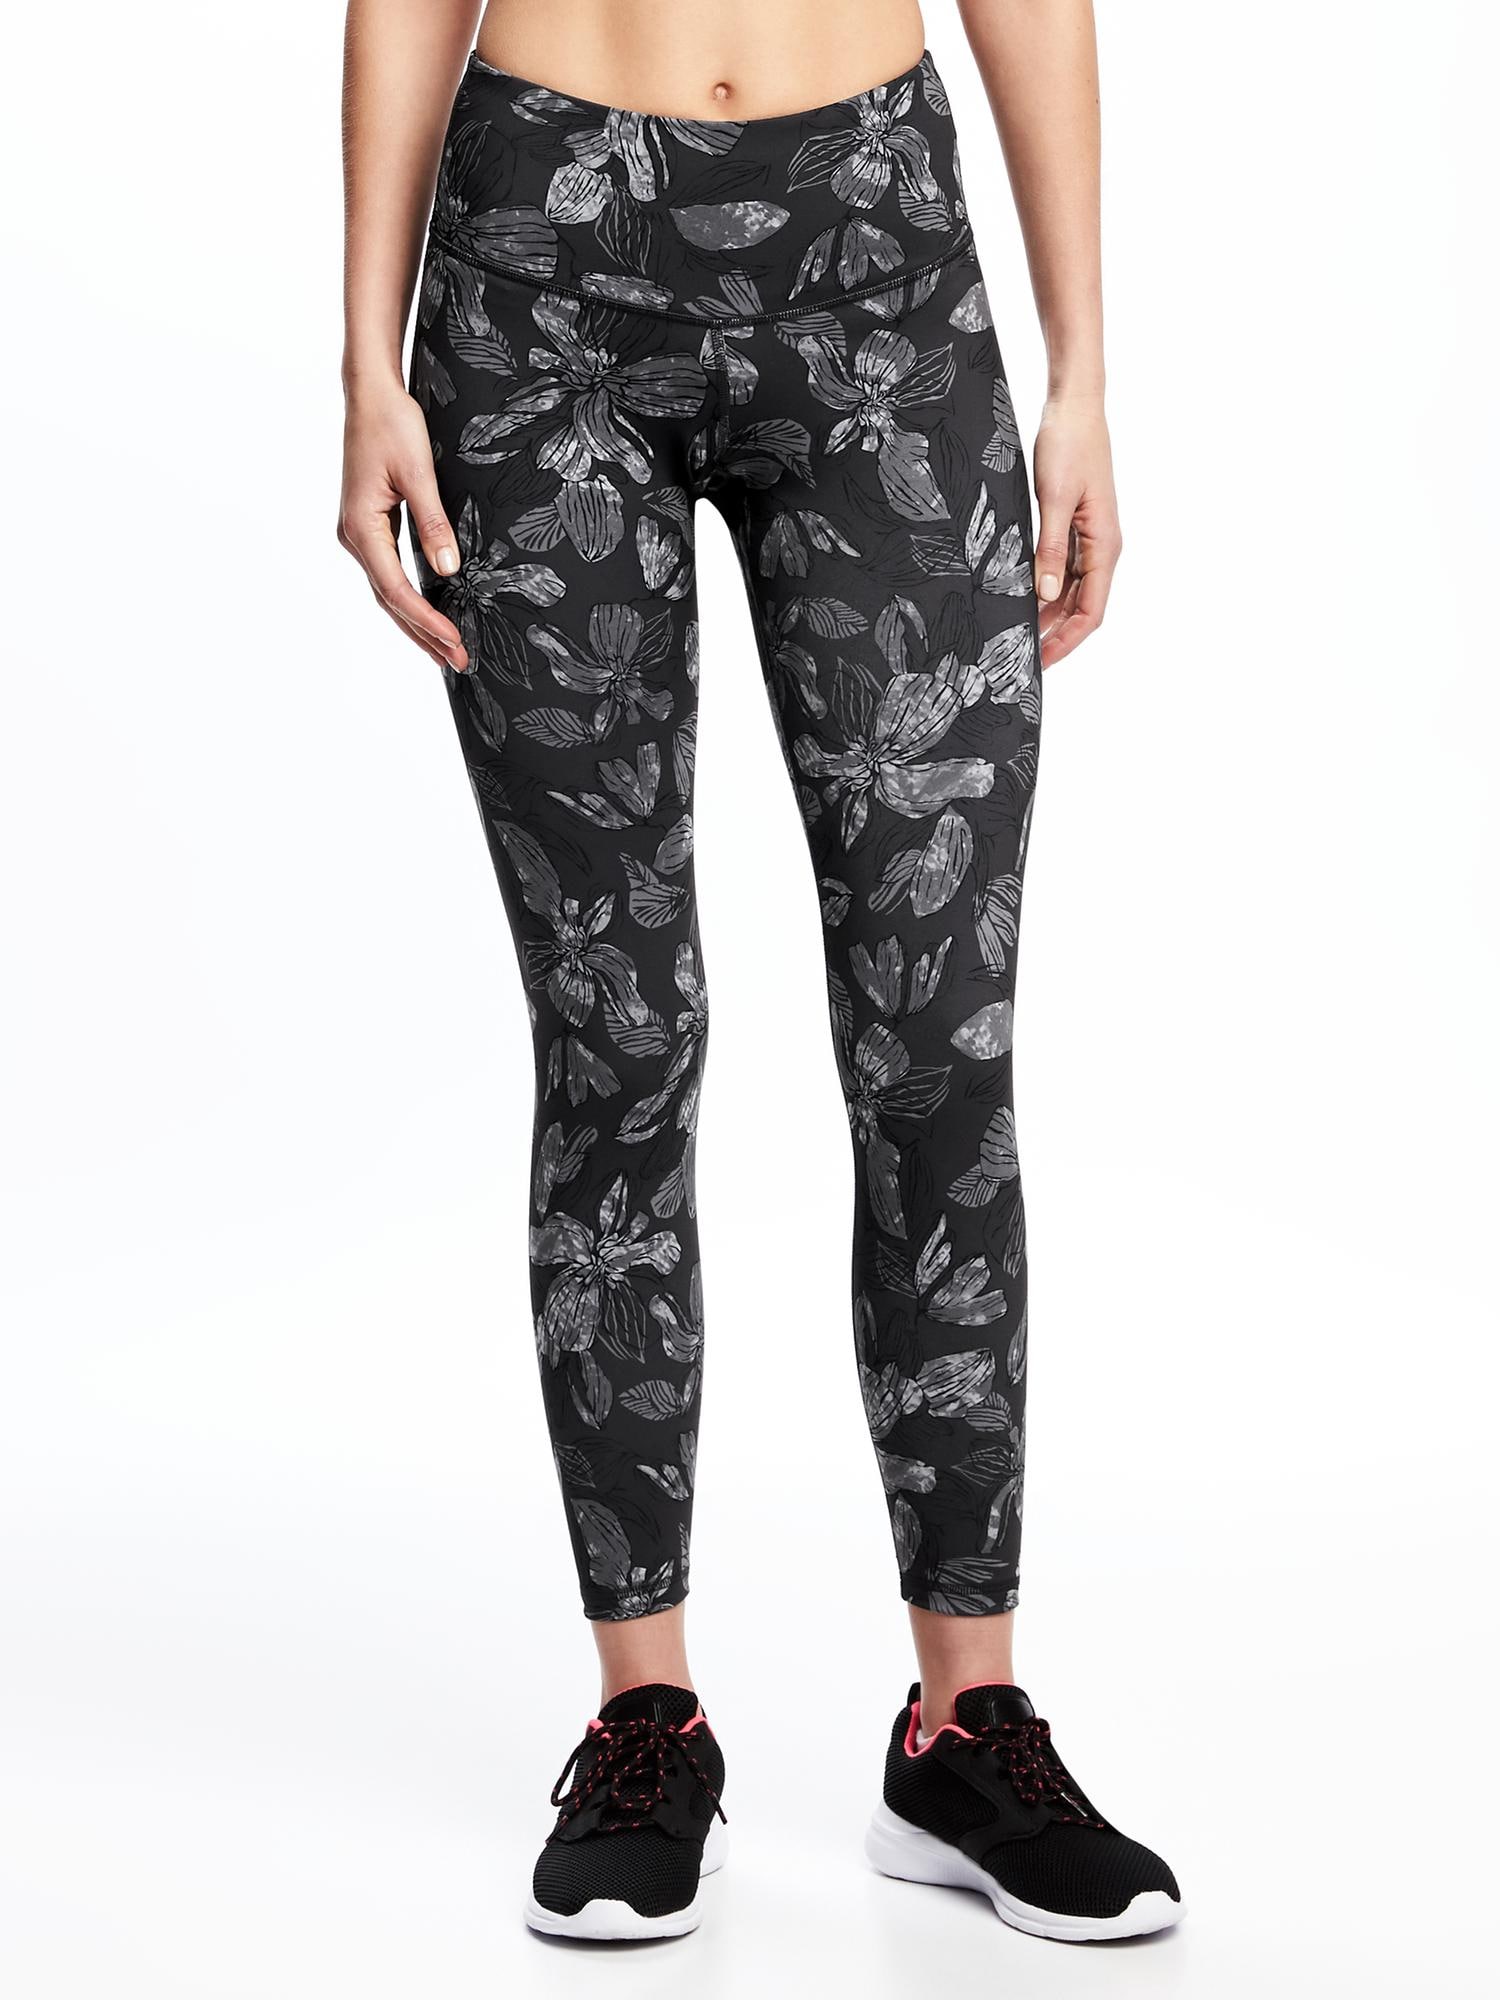 Fabletics Mid Rise Printed Powerhold Leggings in Black Crackle Print Small  - $24 - From Whitney